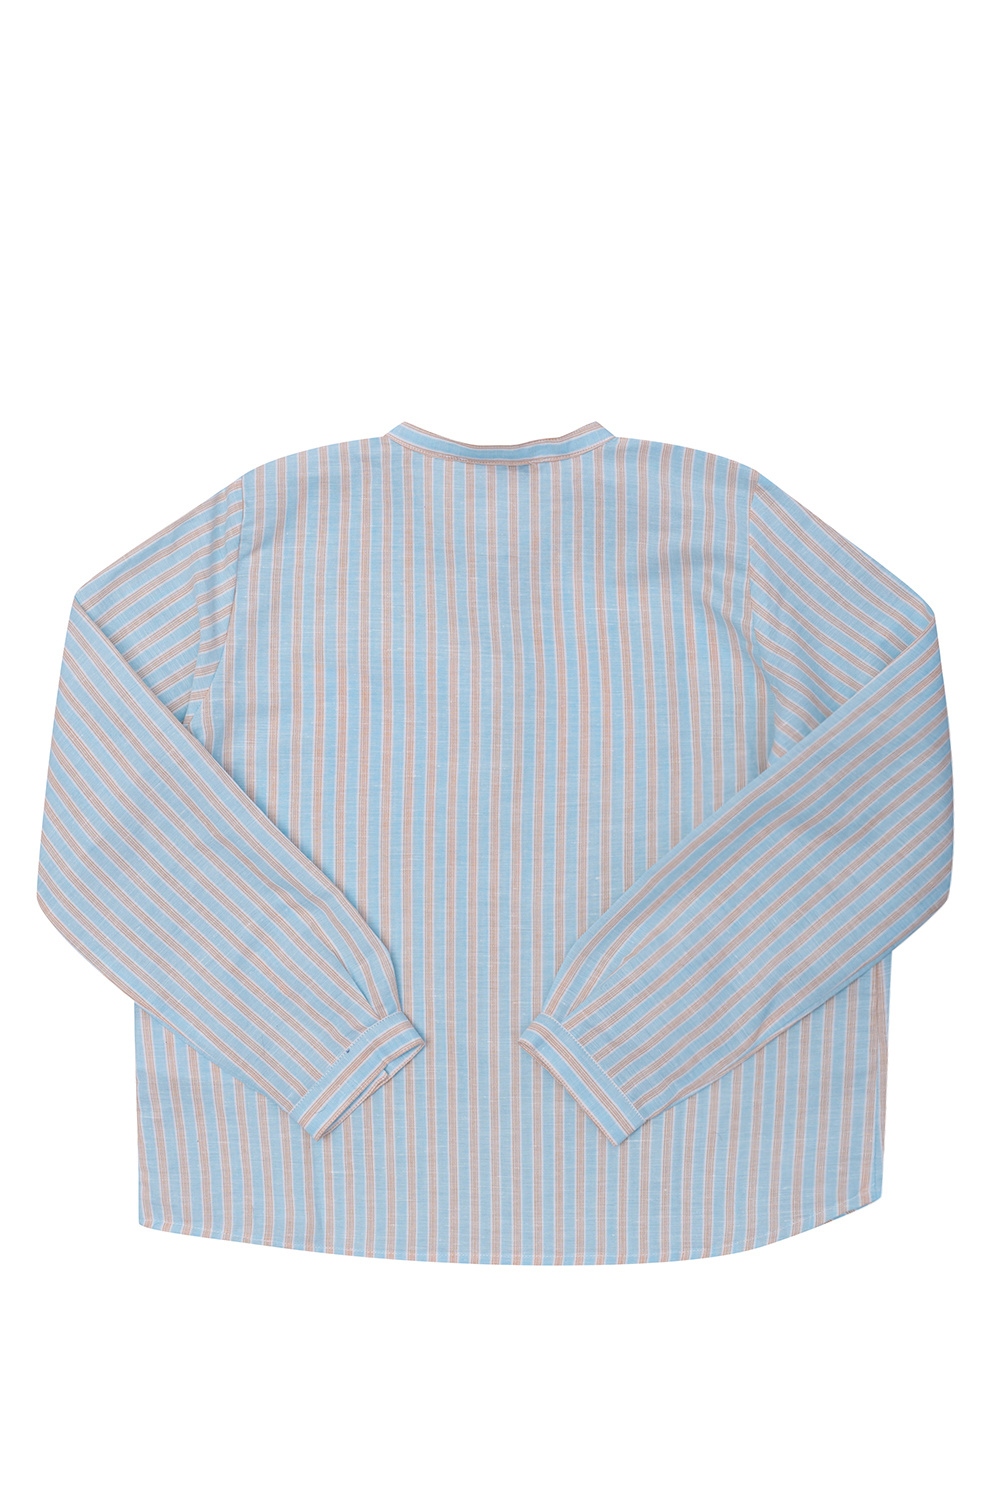 Bonpoint  Striped top